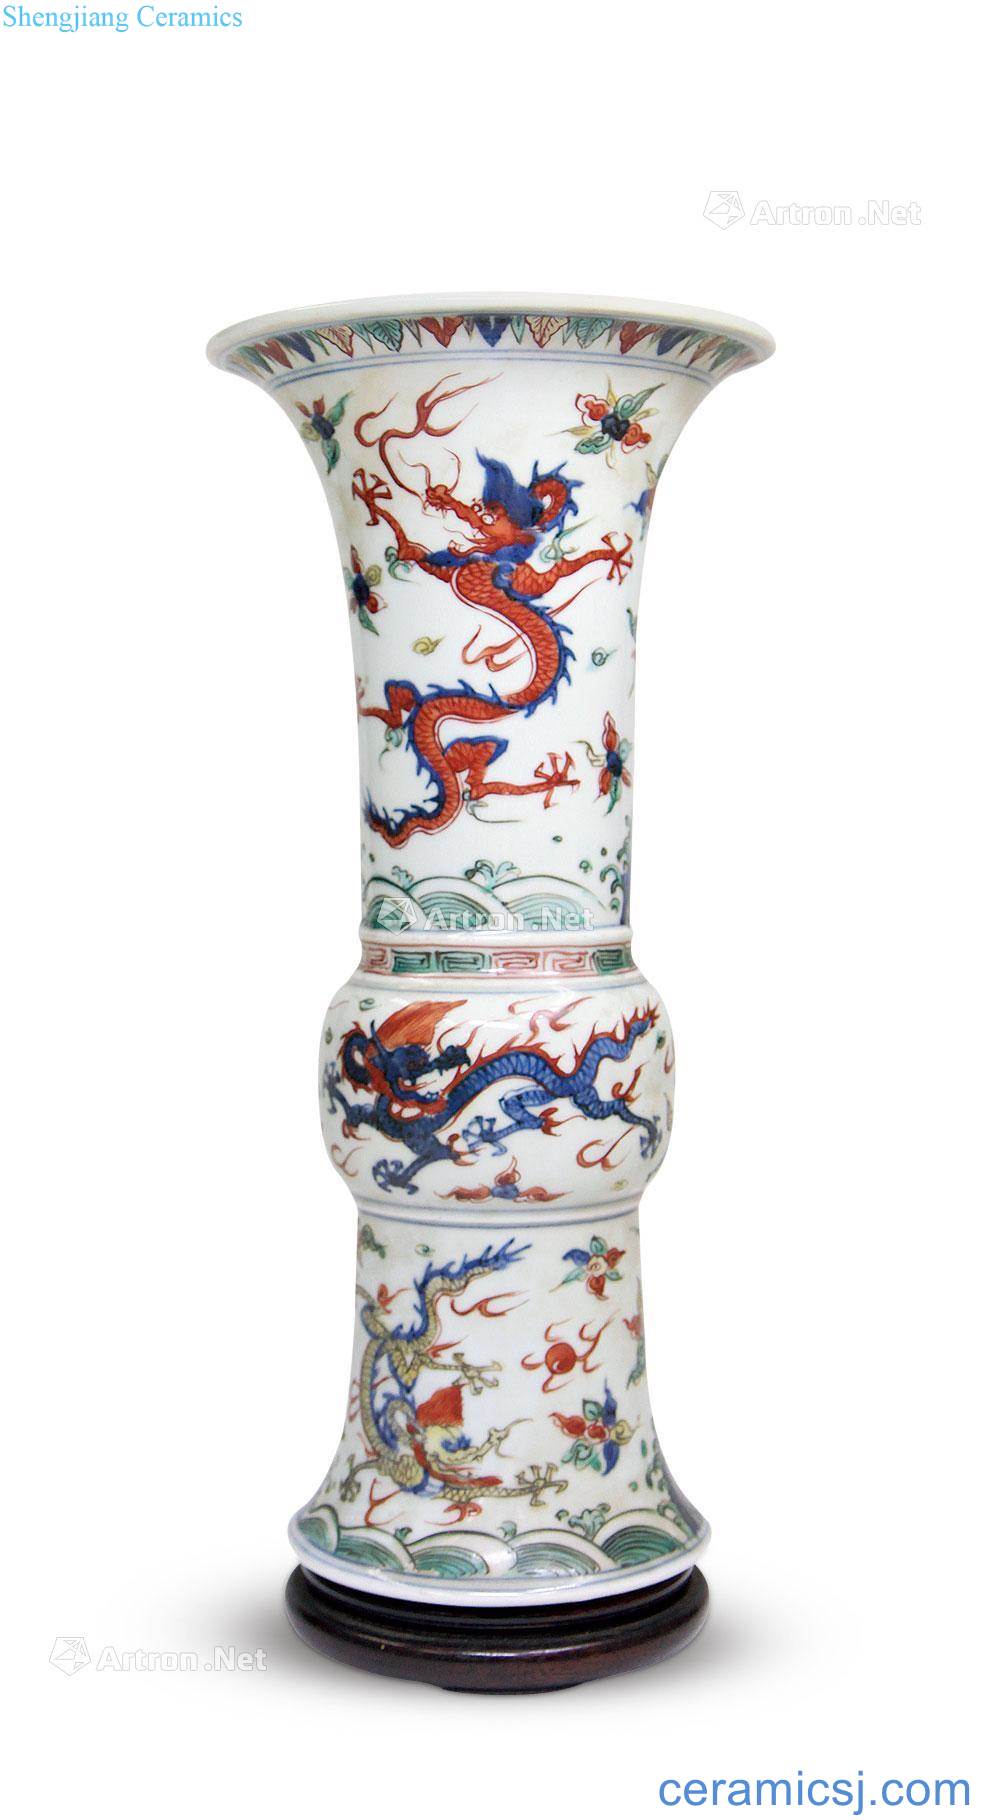 In the 19th century Five dragon grain vase with